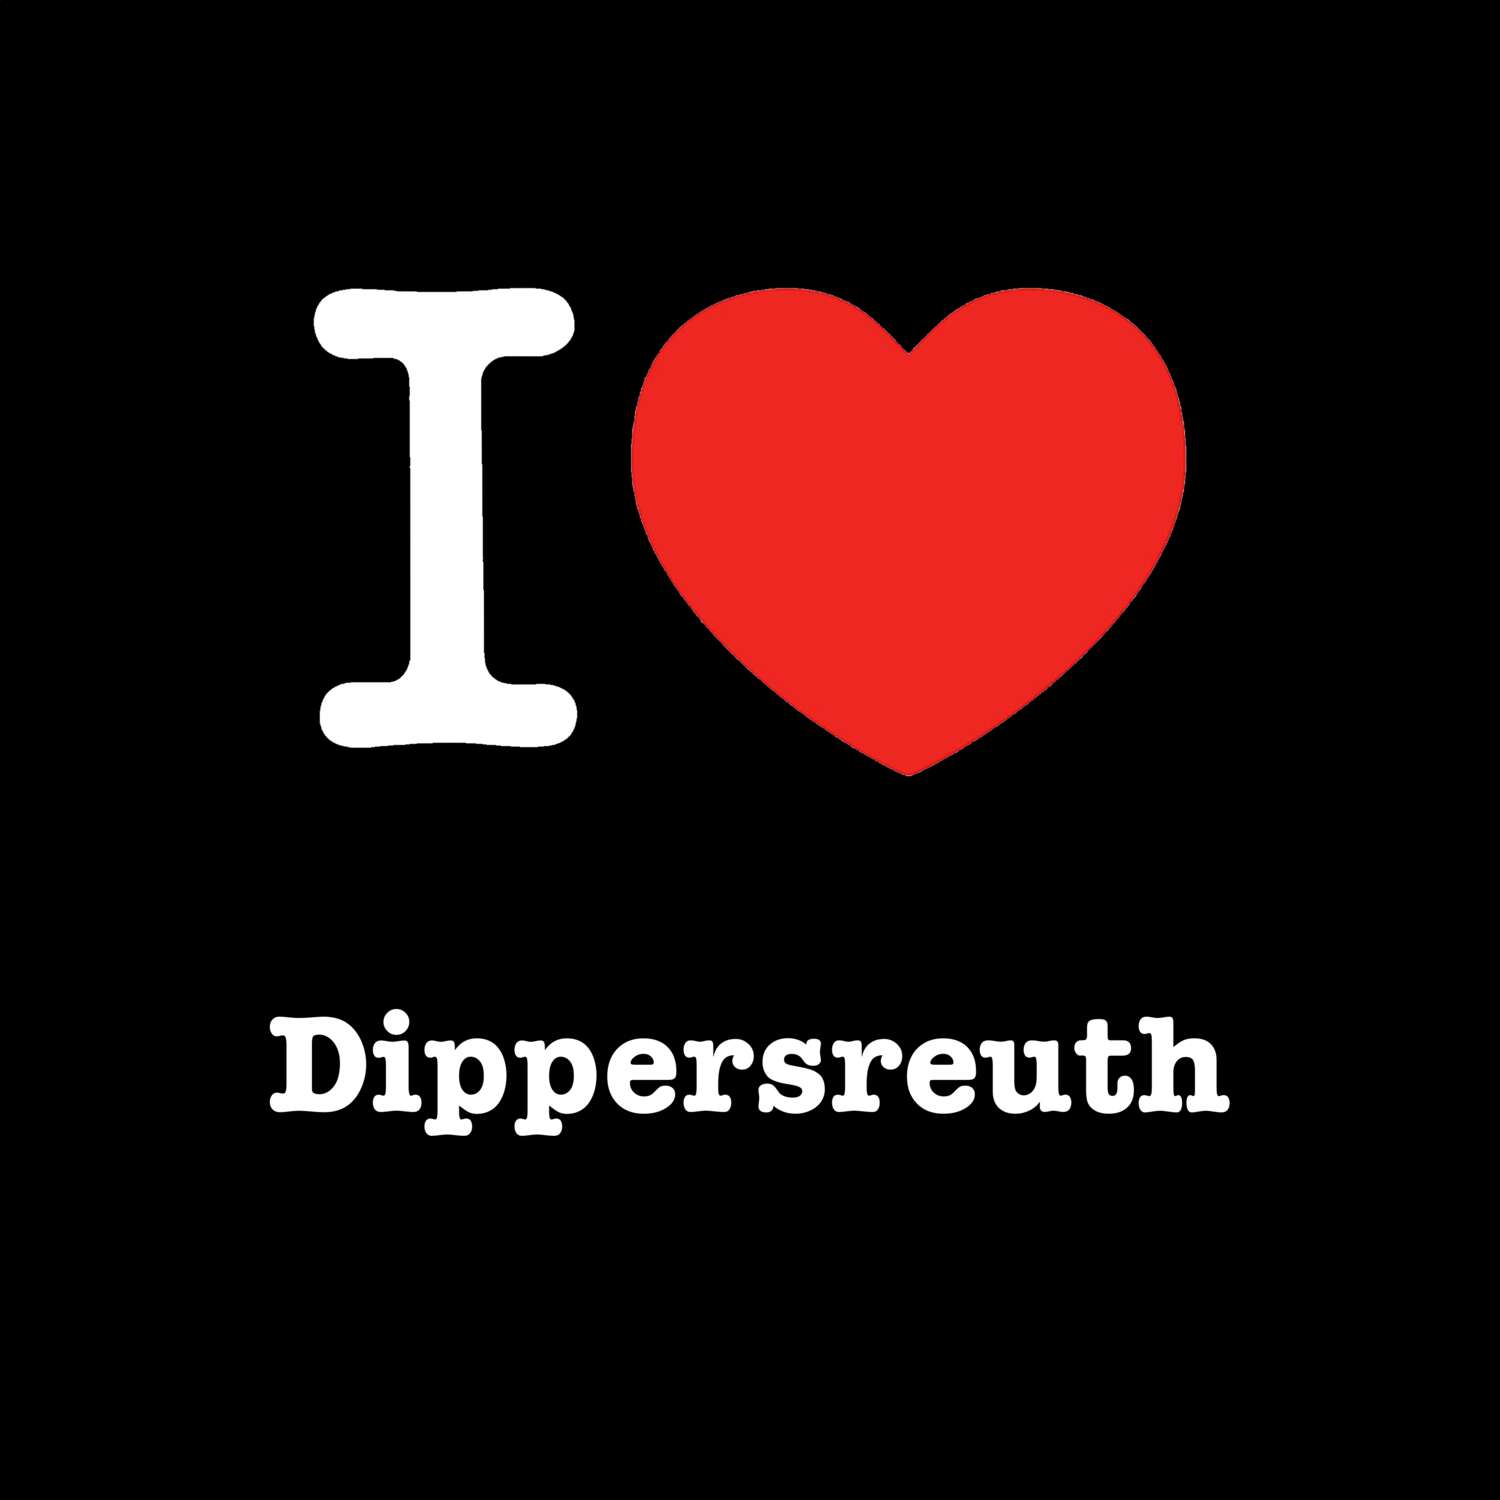 Dippersreuth T-Shirt »I love«